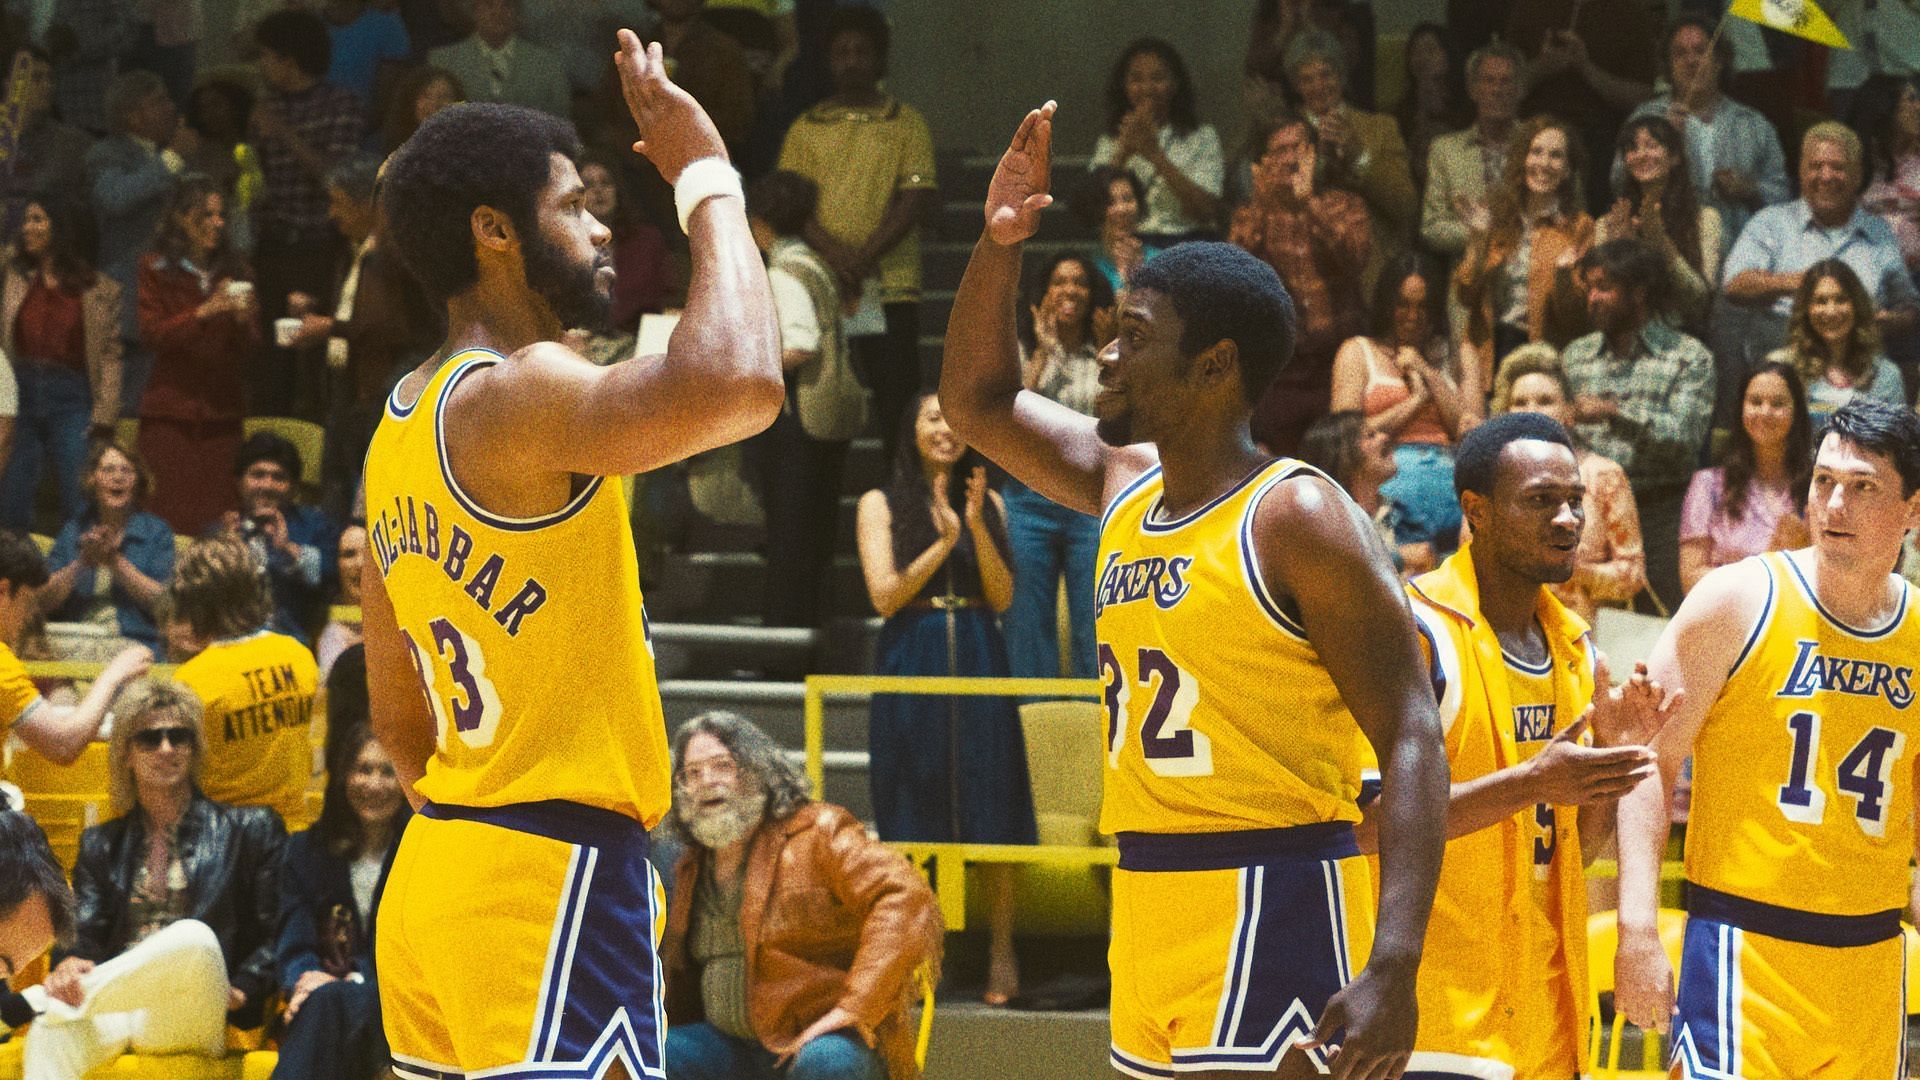 NBA Finals MVP 1980 on Winning Time: Magic Johnson story is remarkable